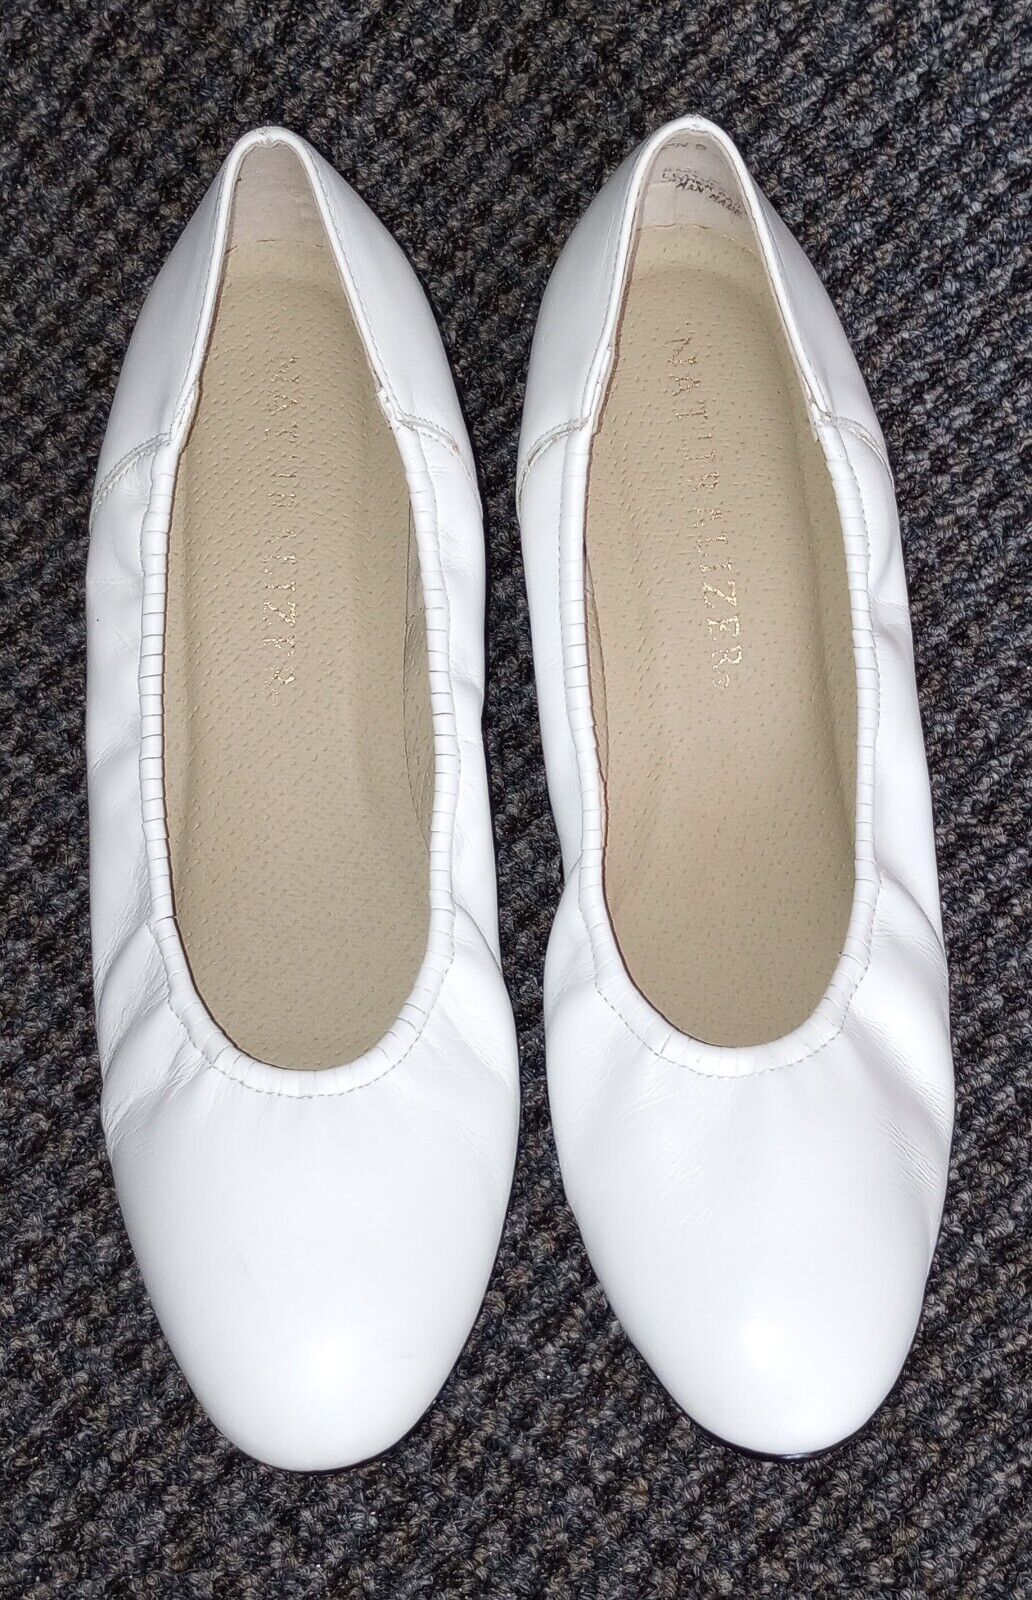 NATURALIZER women's pumps, size 8, white, soft on the ring